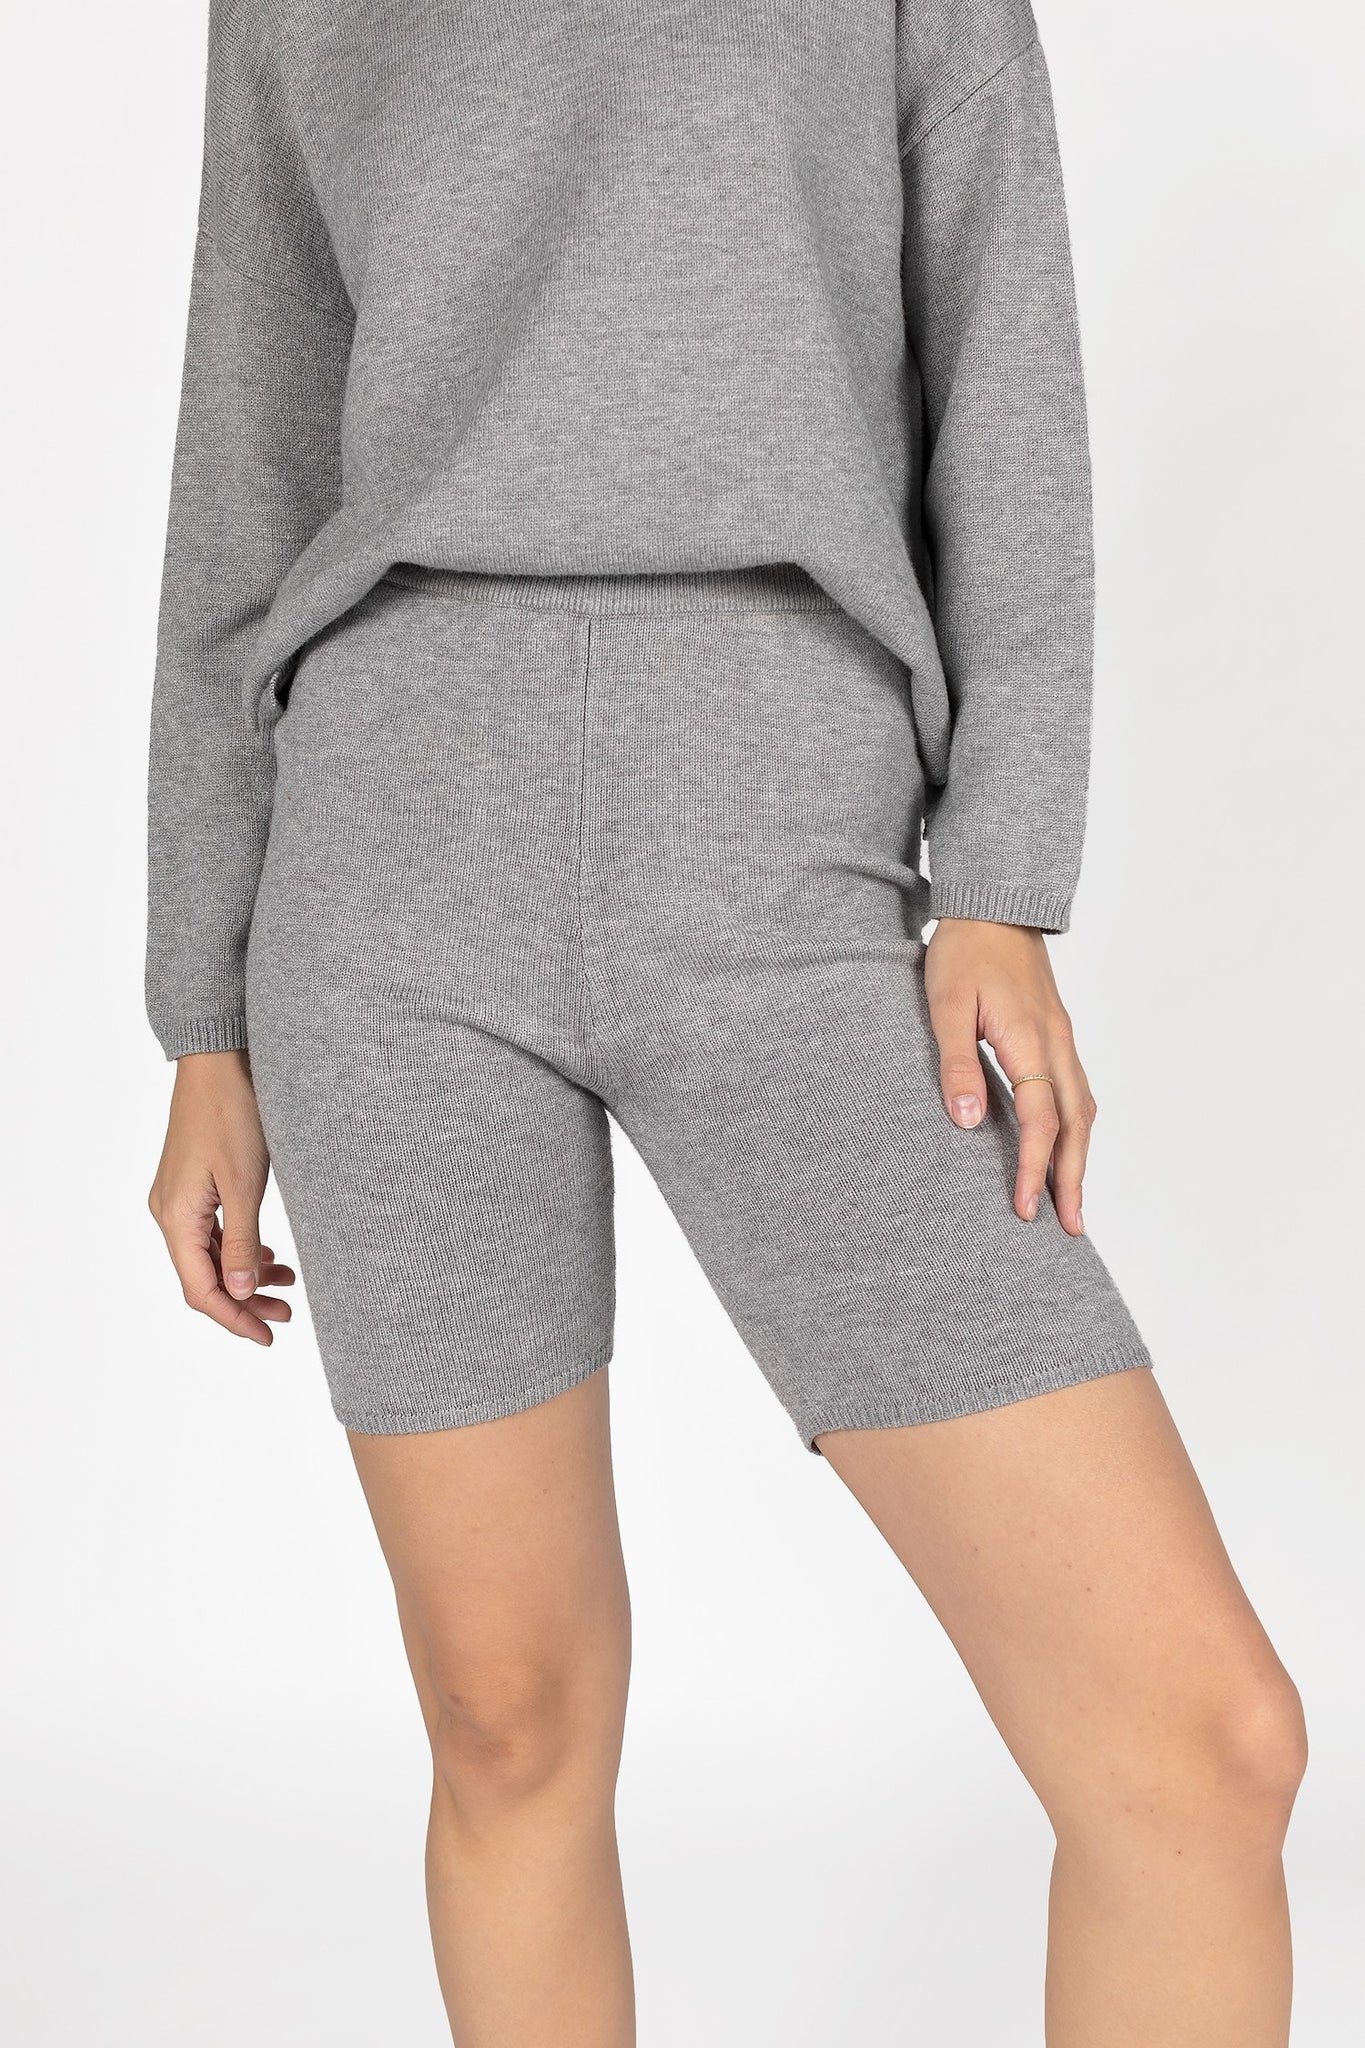 UNIKONCEPT Lifestyle Boutique and Lounge; Mod Ref Birdie Knit Bike Shorts. Grey knit mid-thigh bike shorts pictured on a model